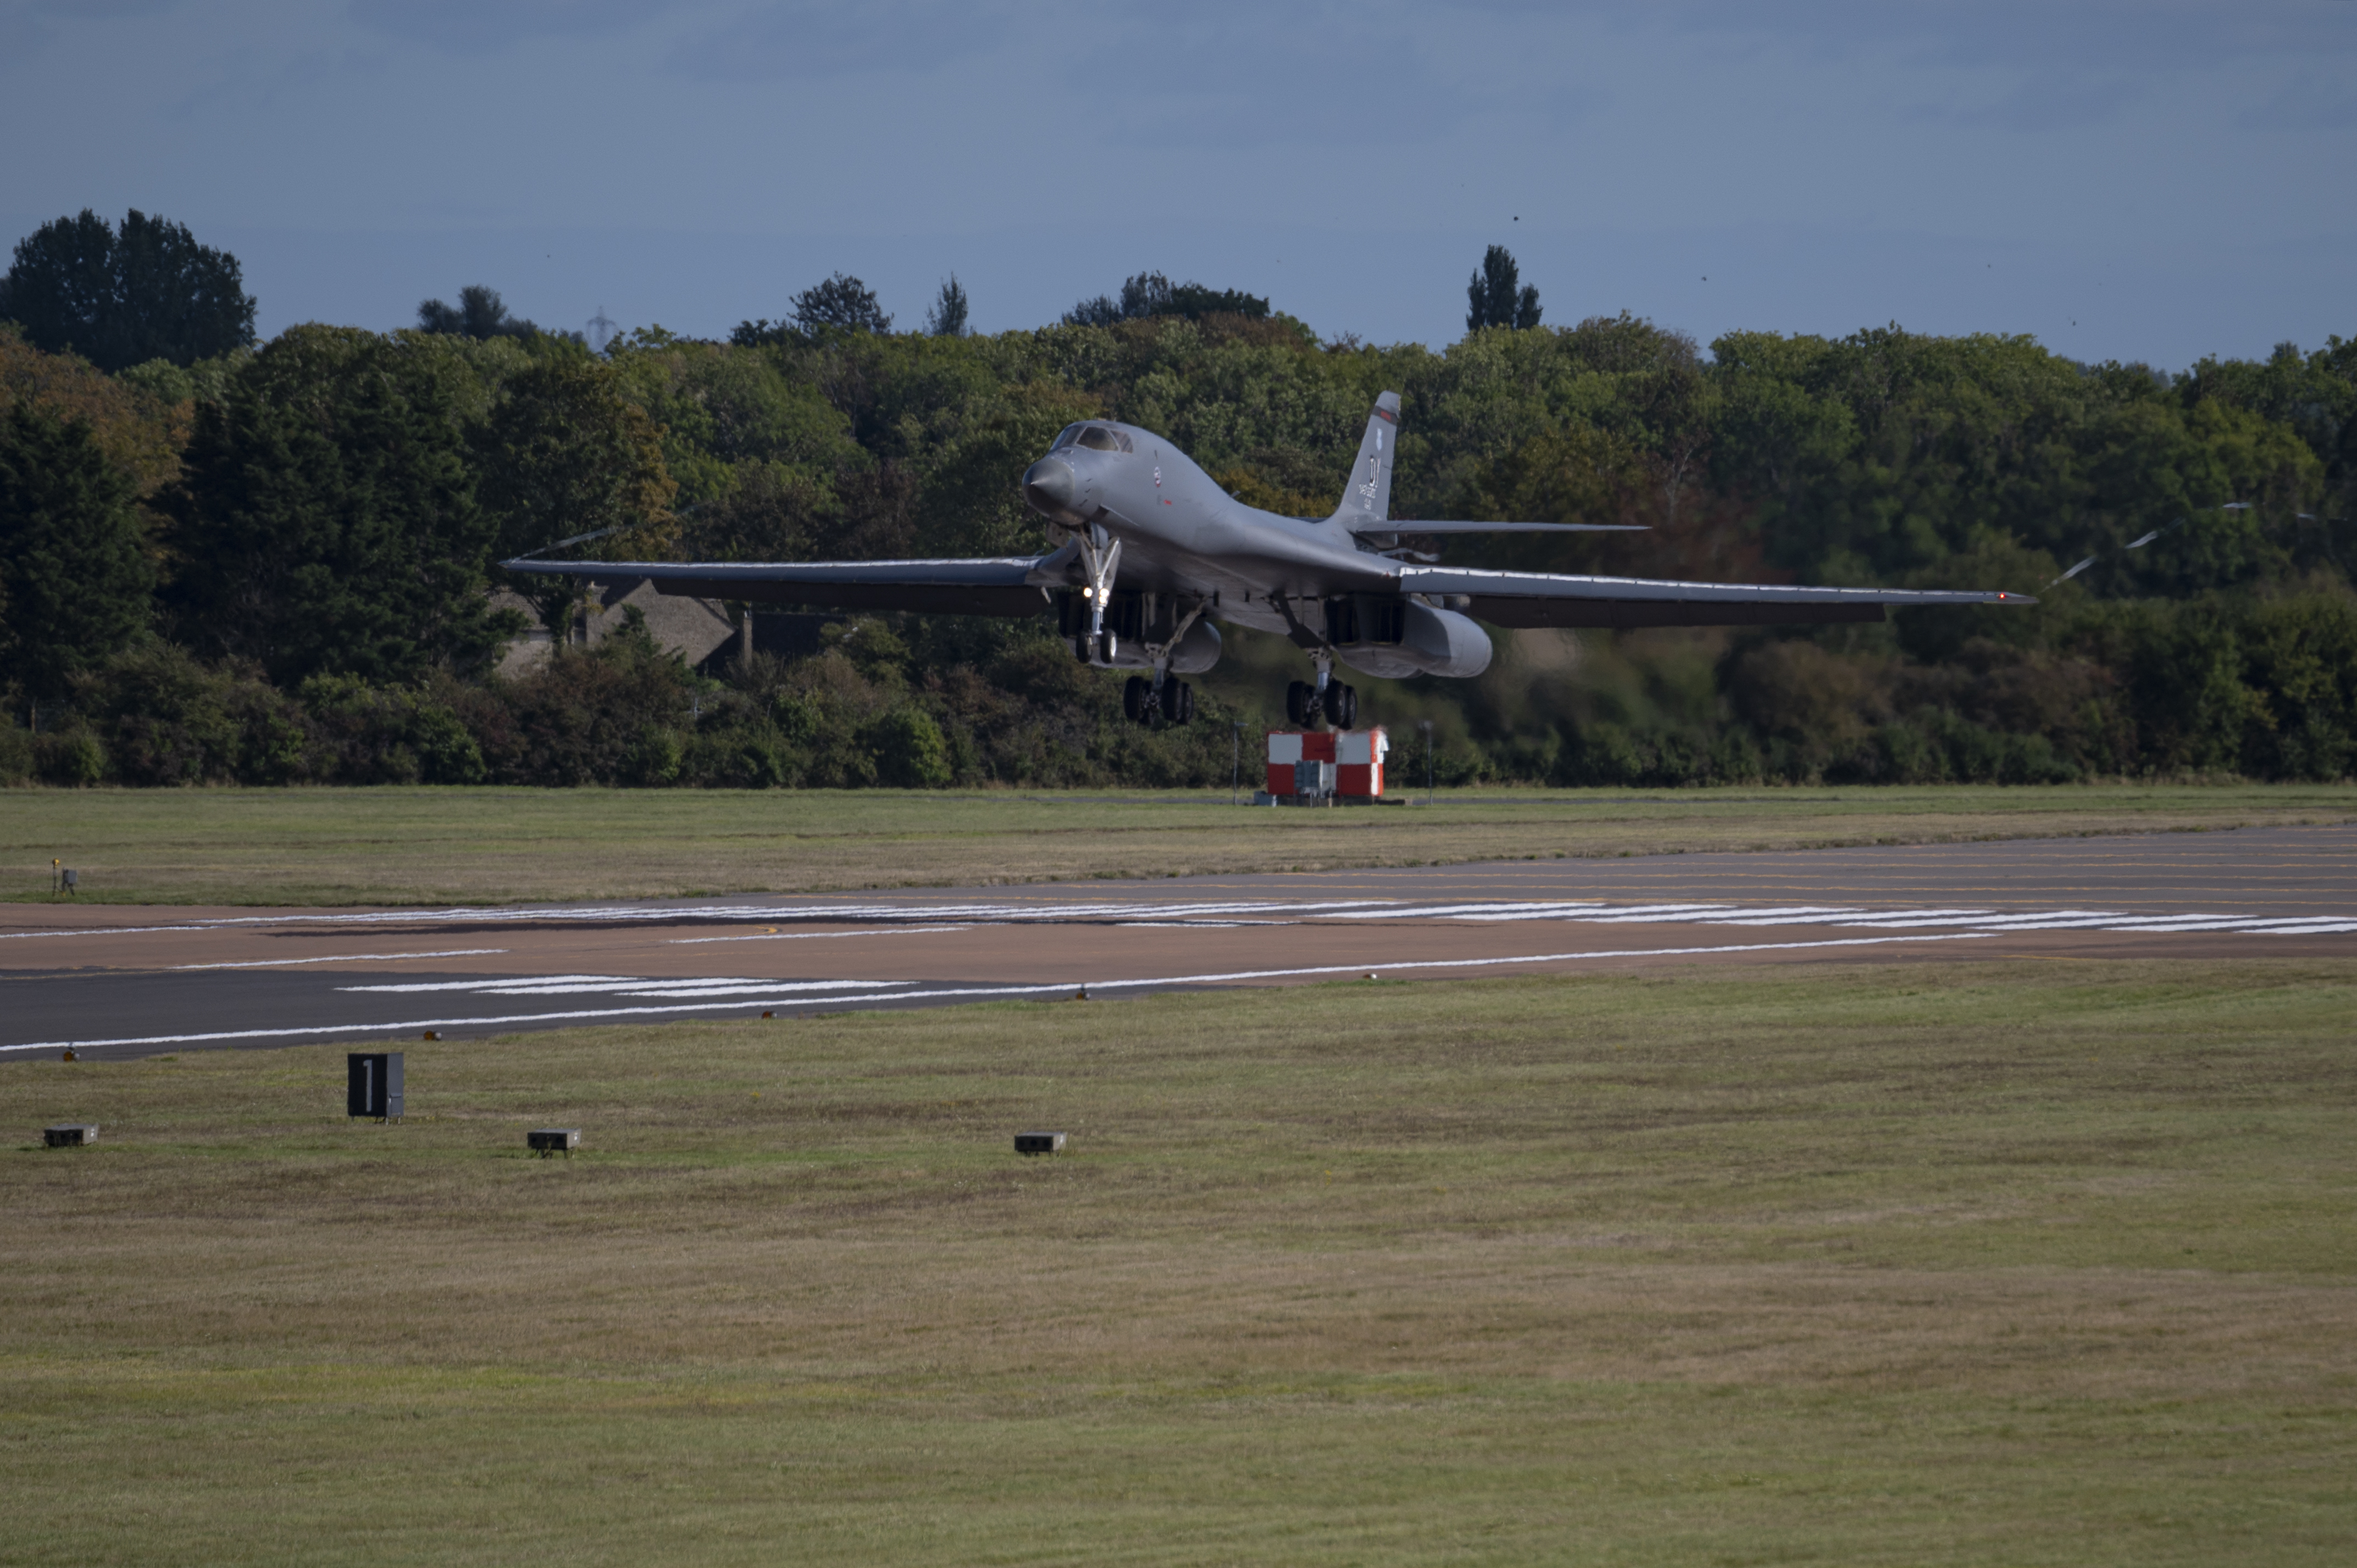 A United States Air Force B-1 Bomber takes off from the runway.